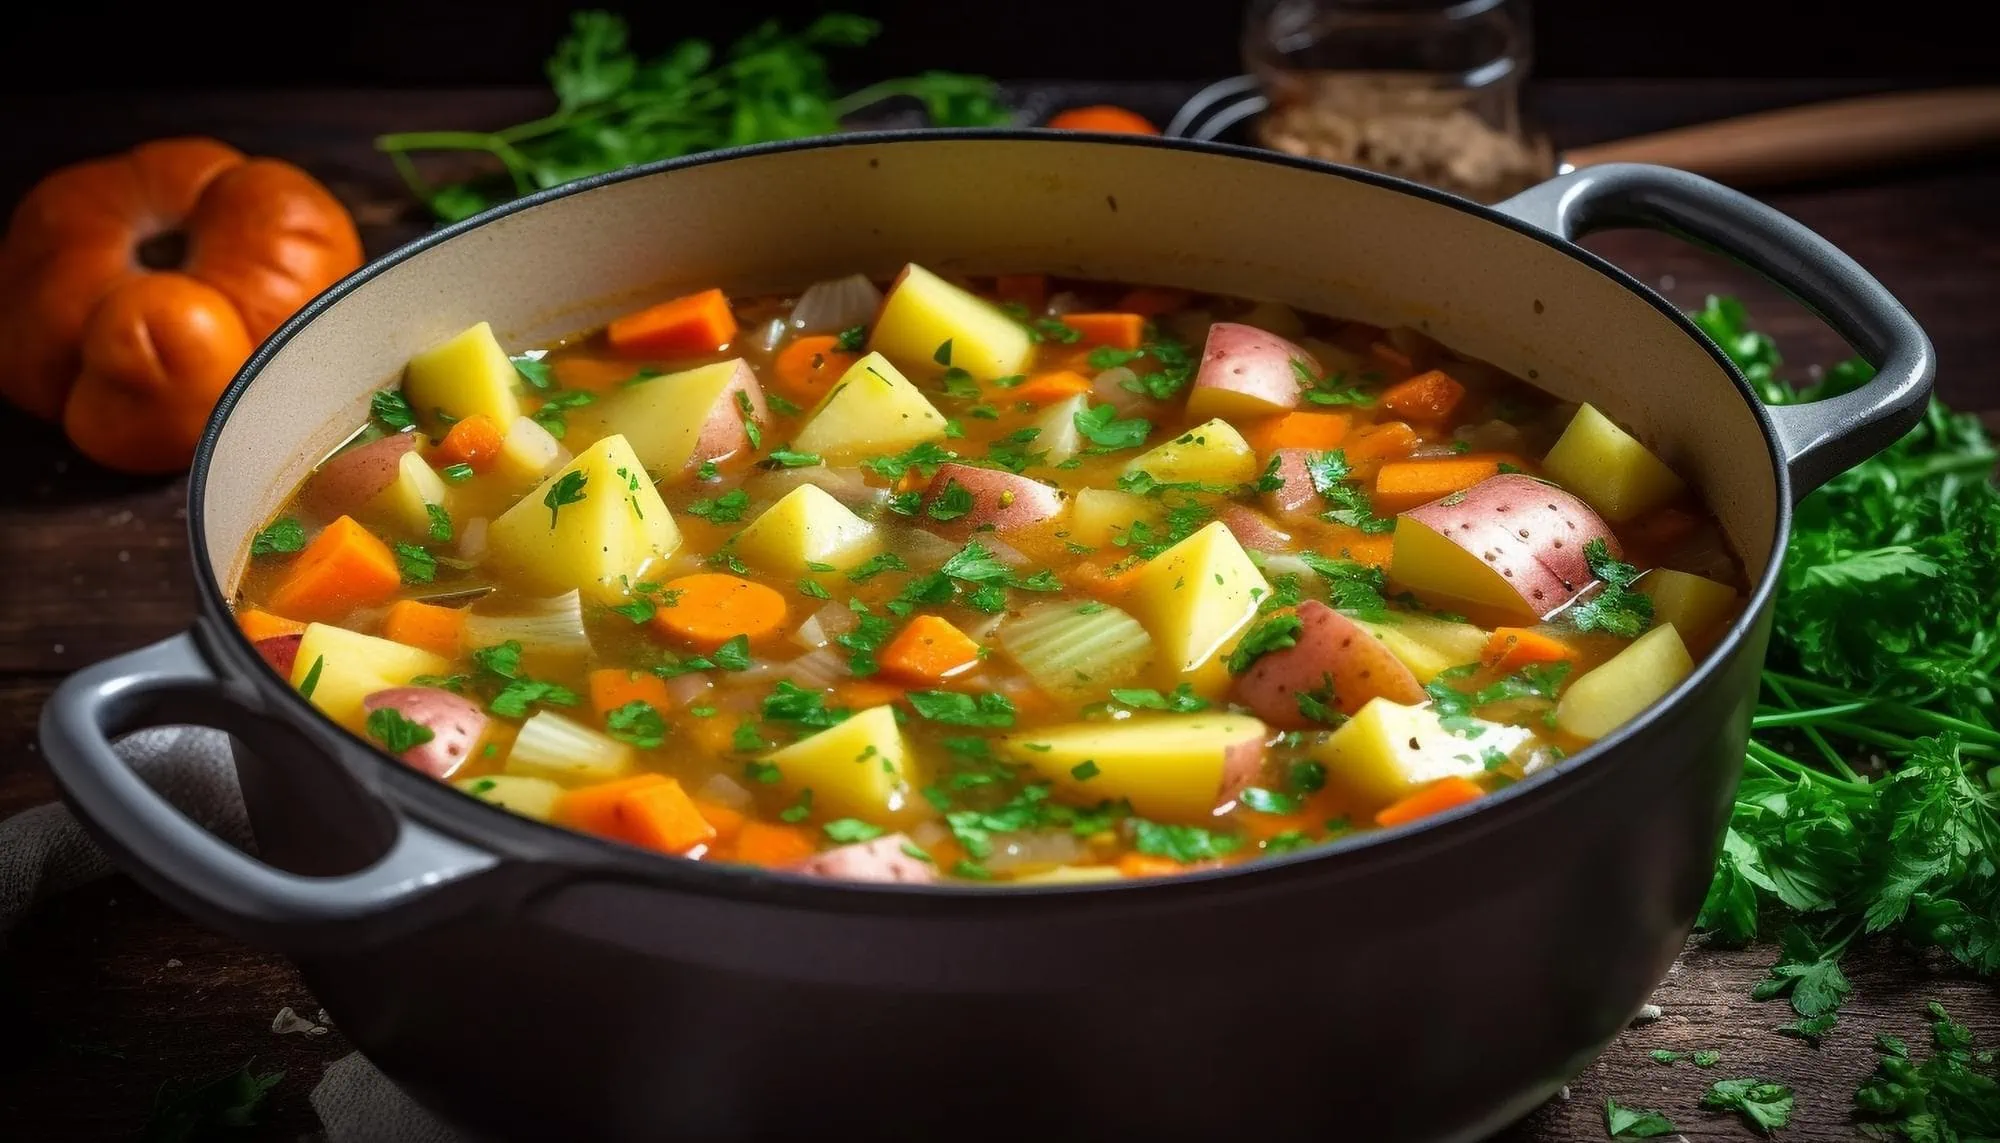 Blue Hubbard squash stew recipe with vegetables